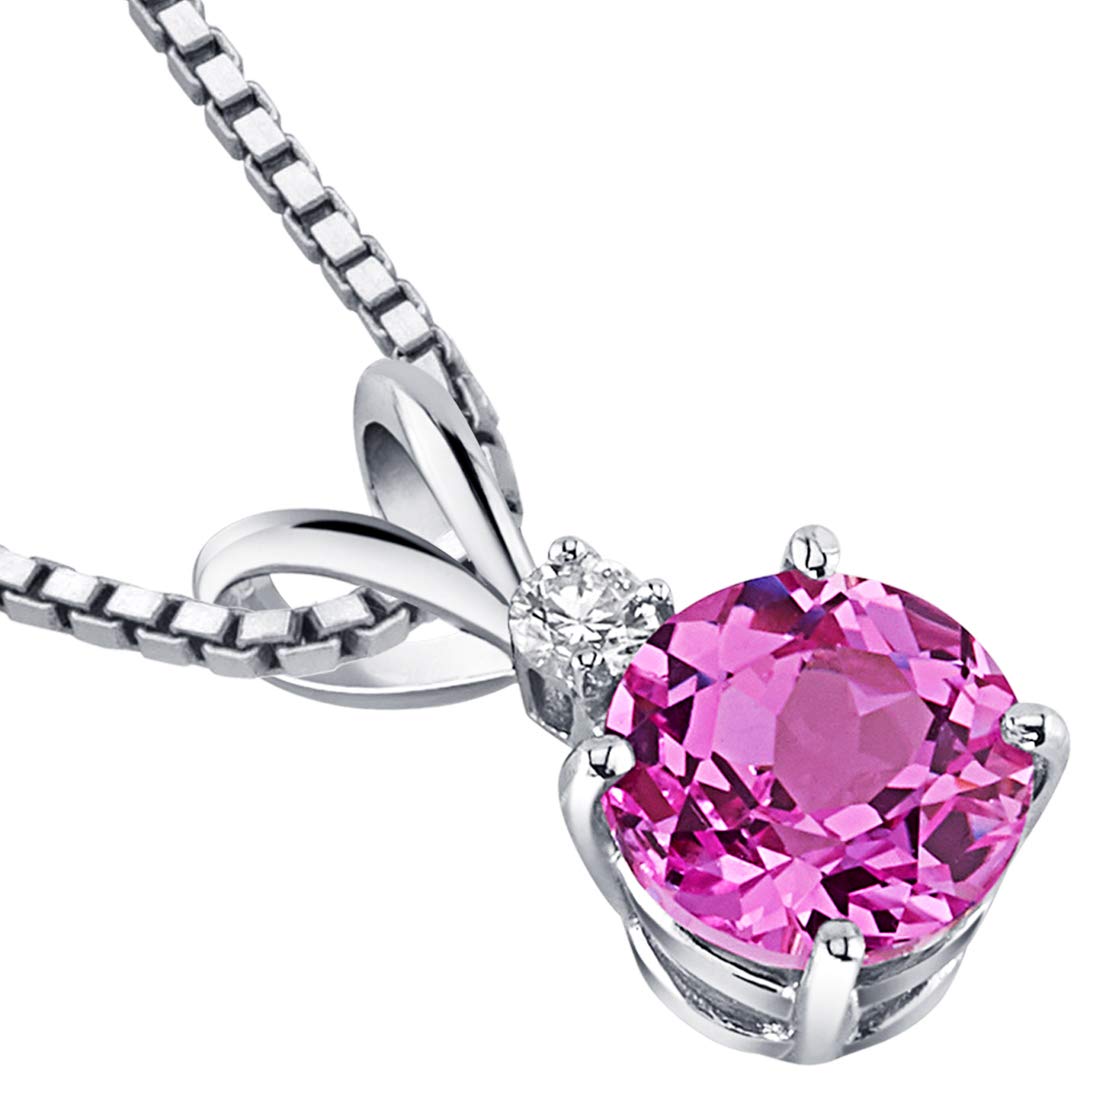 PEORA Created Pink Sapphire with Genuine Diamond Pendant in 14K White Gold, Elegant Solitaire, Round Shape, 6.50mm, 1.4 Carats total